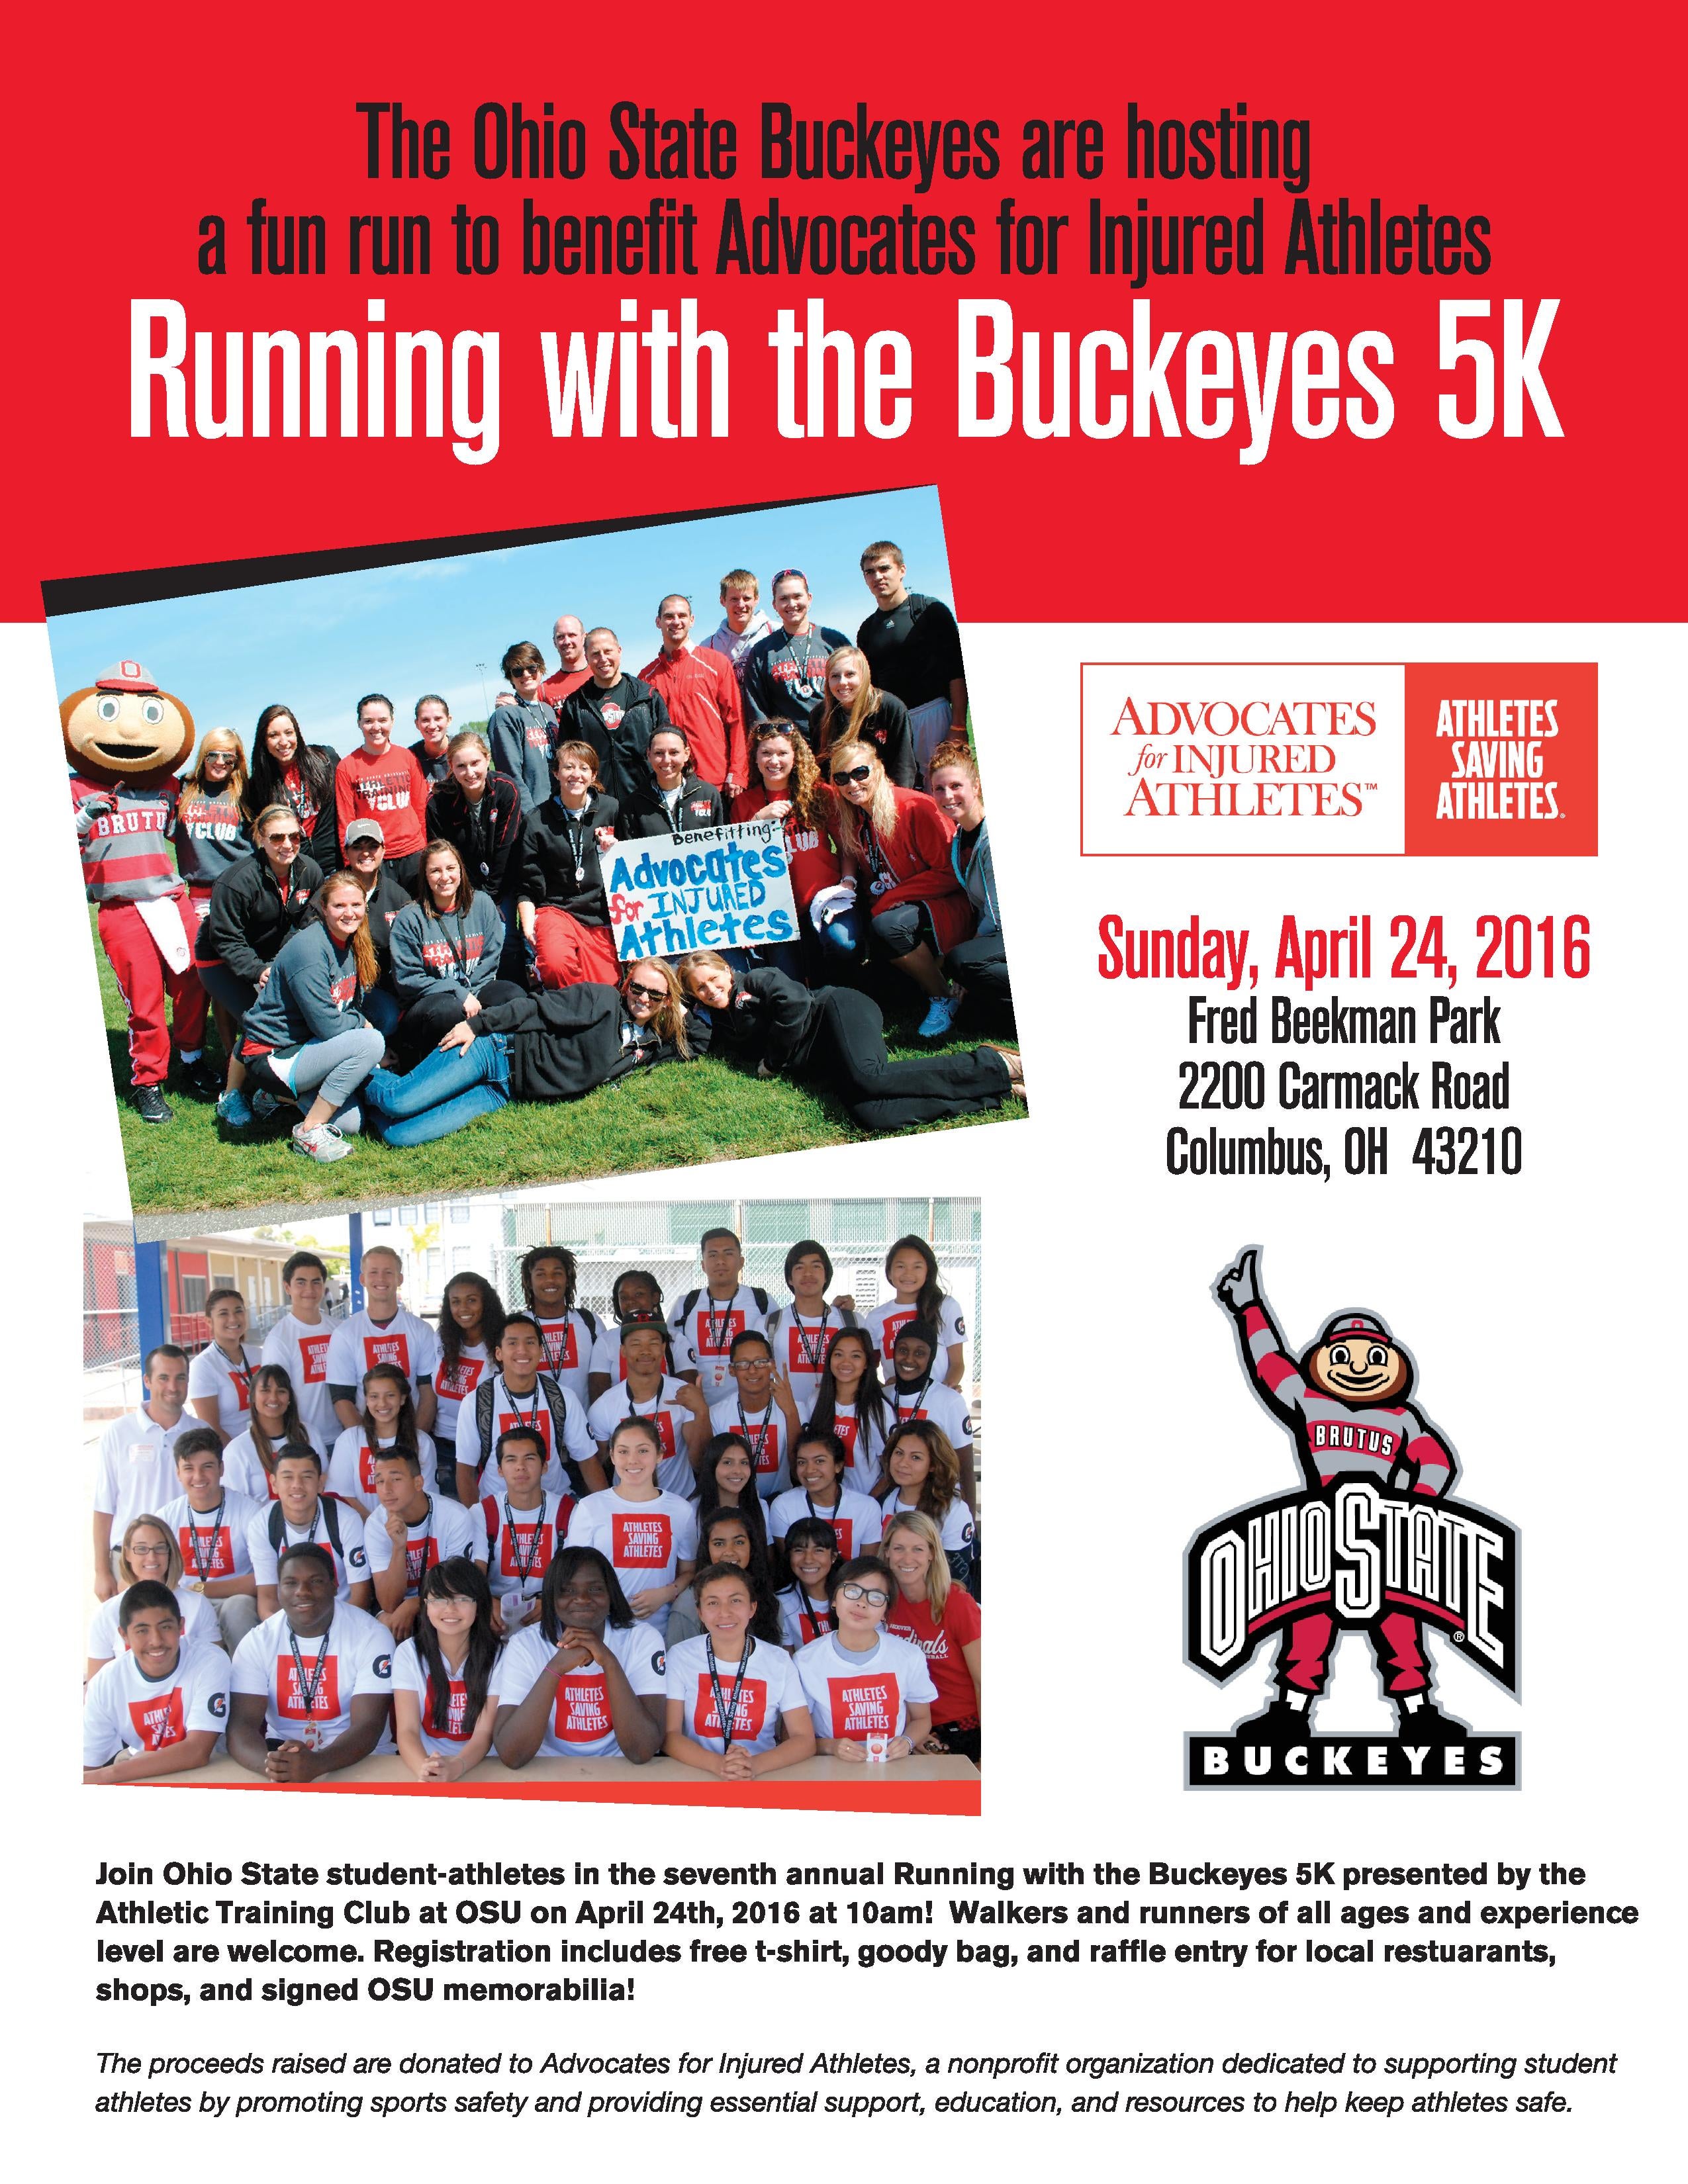 Running with the Buckeyes 5K Image